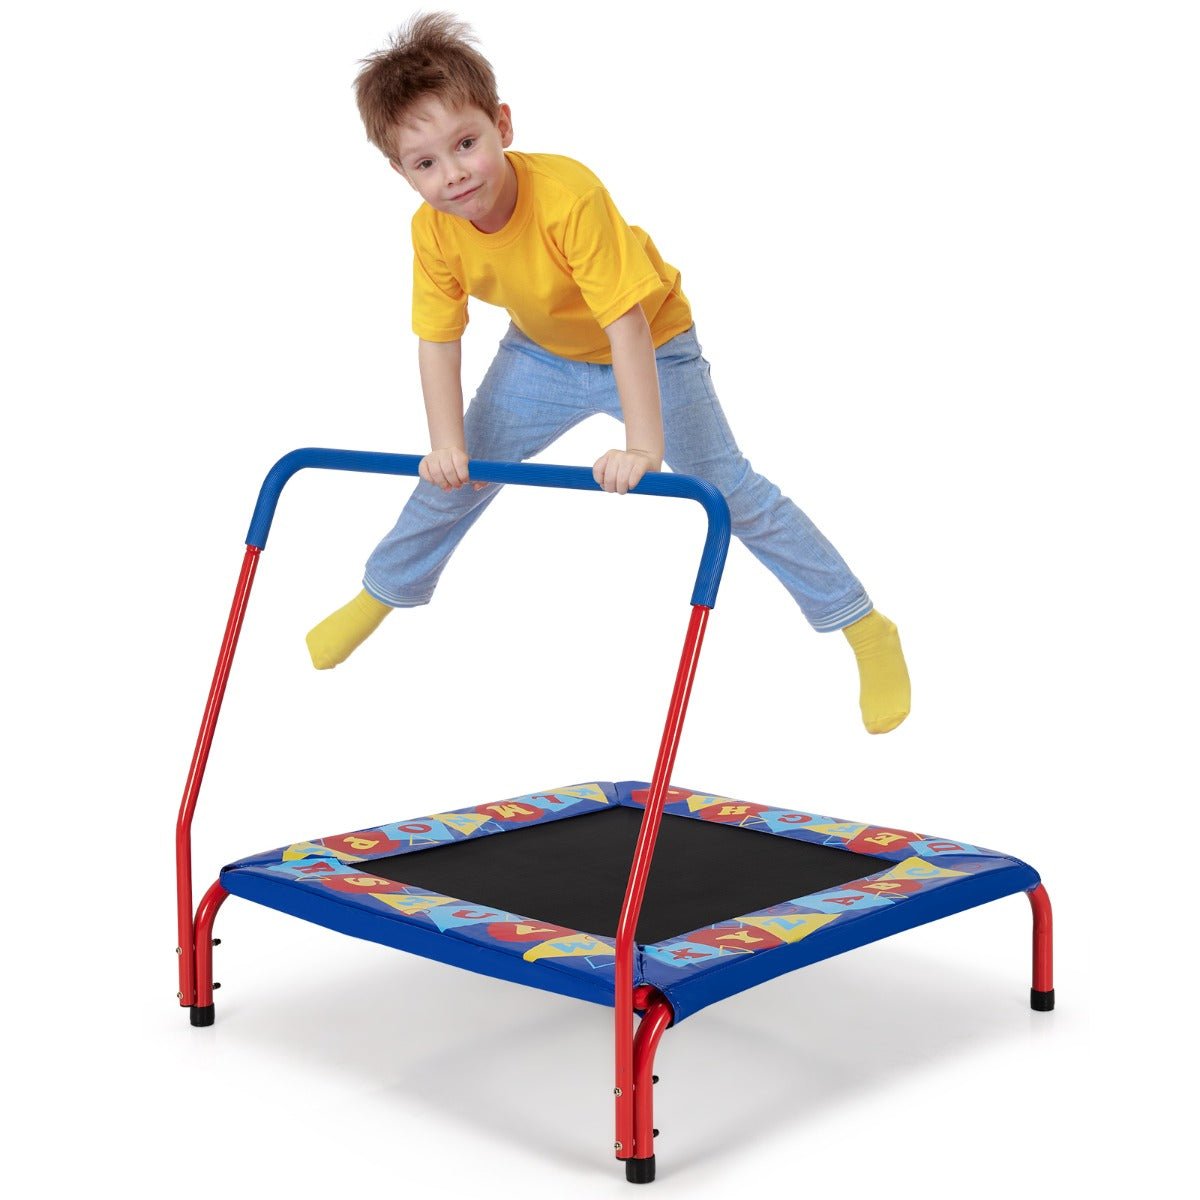 Active Play: Square Toddler Trampoline with Foam Covered Handle for Kids